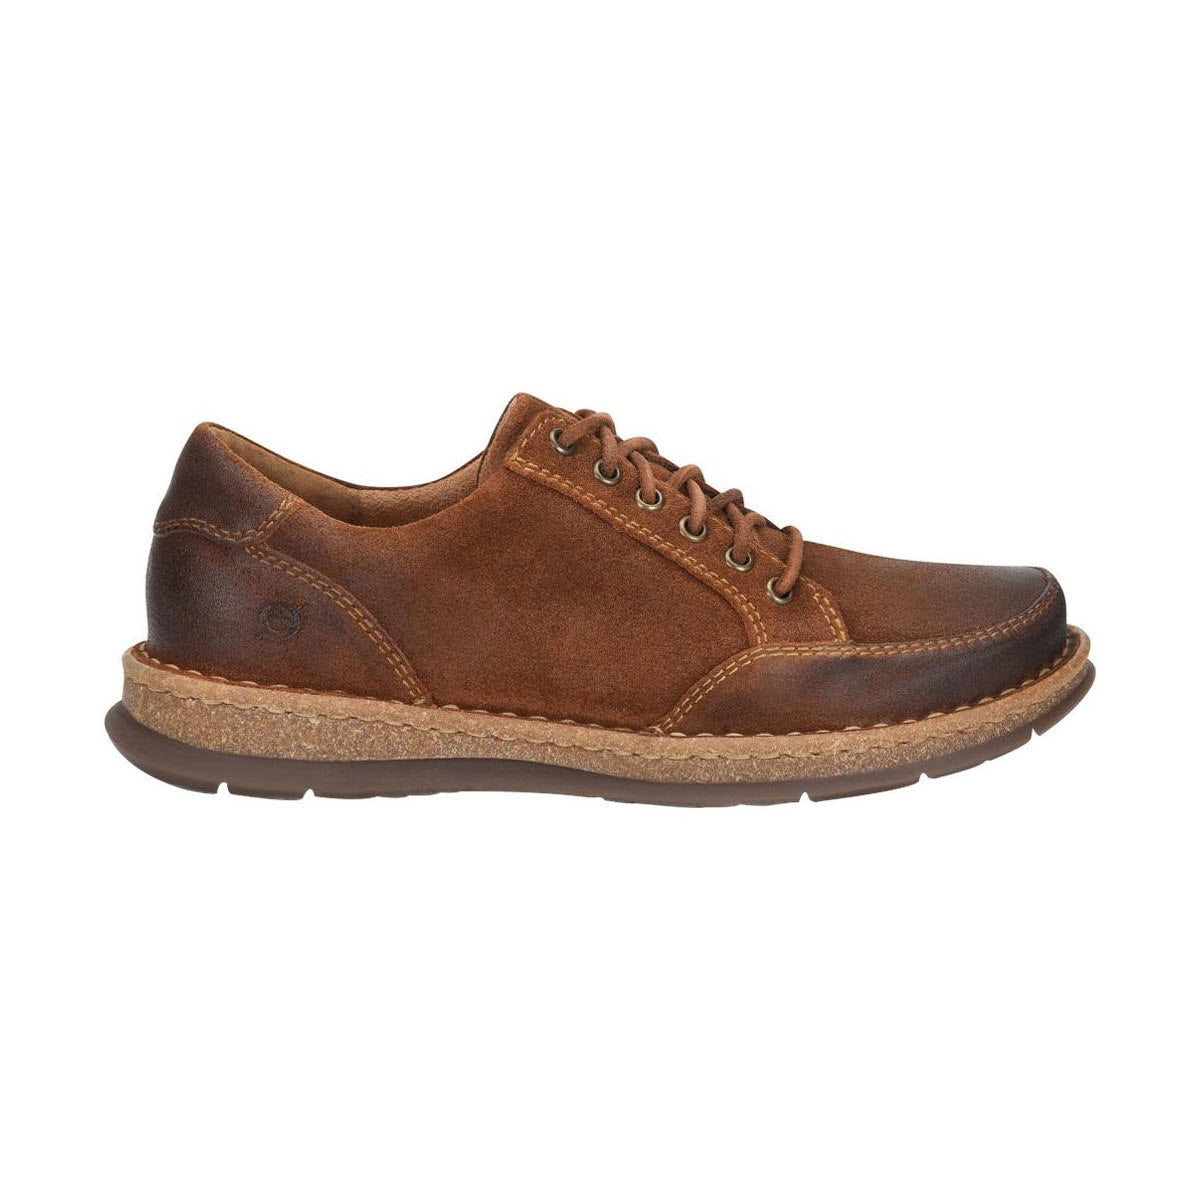 Born Bronson Lace Oxford Tan Saddle - Mens casual shoe with lace-up closure and a durable rubber outsole, displayed on a white background.